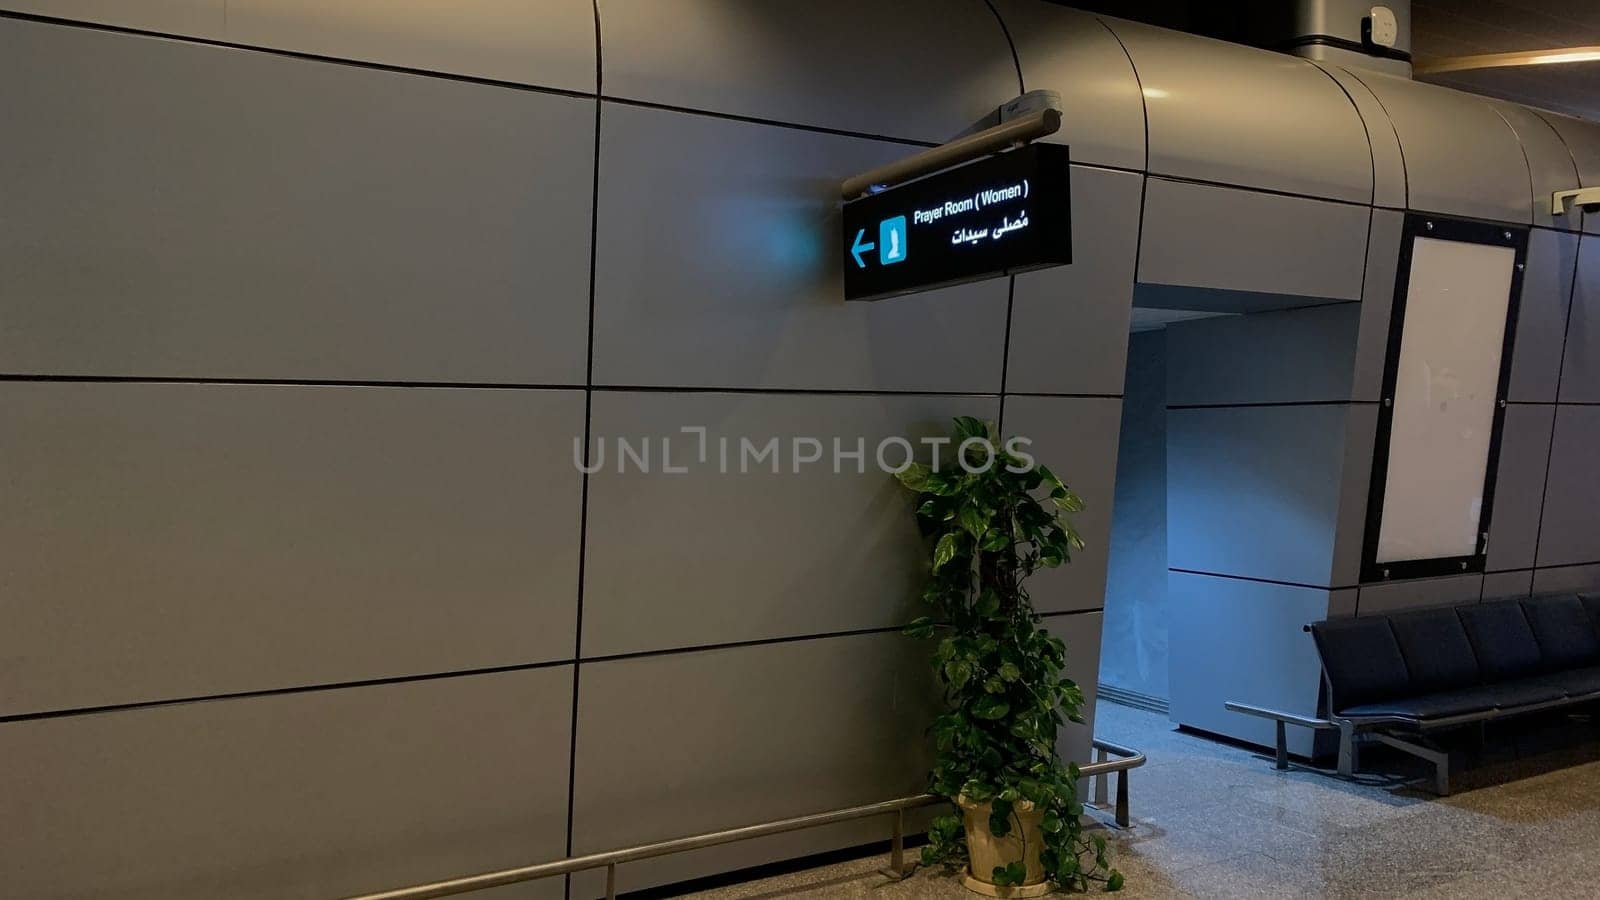 Entrance to prayer room for Muslim women in public place, sign indicating religious room in airport